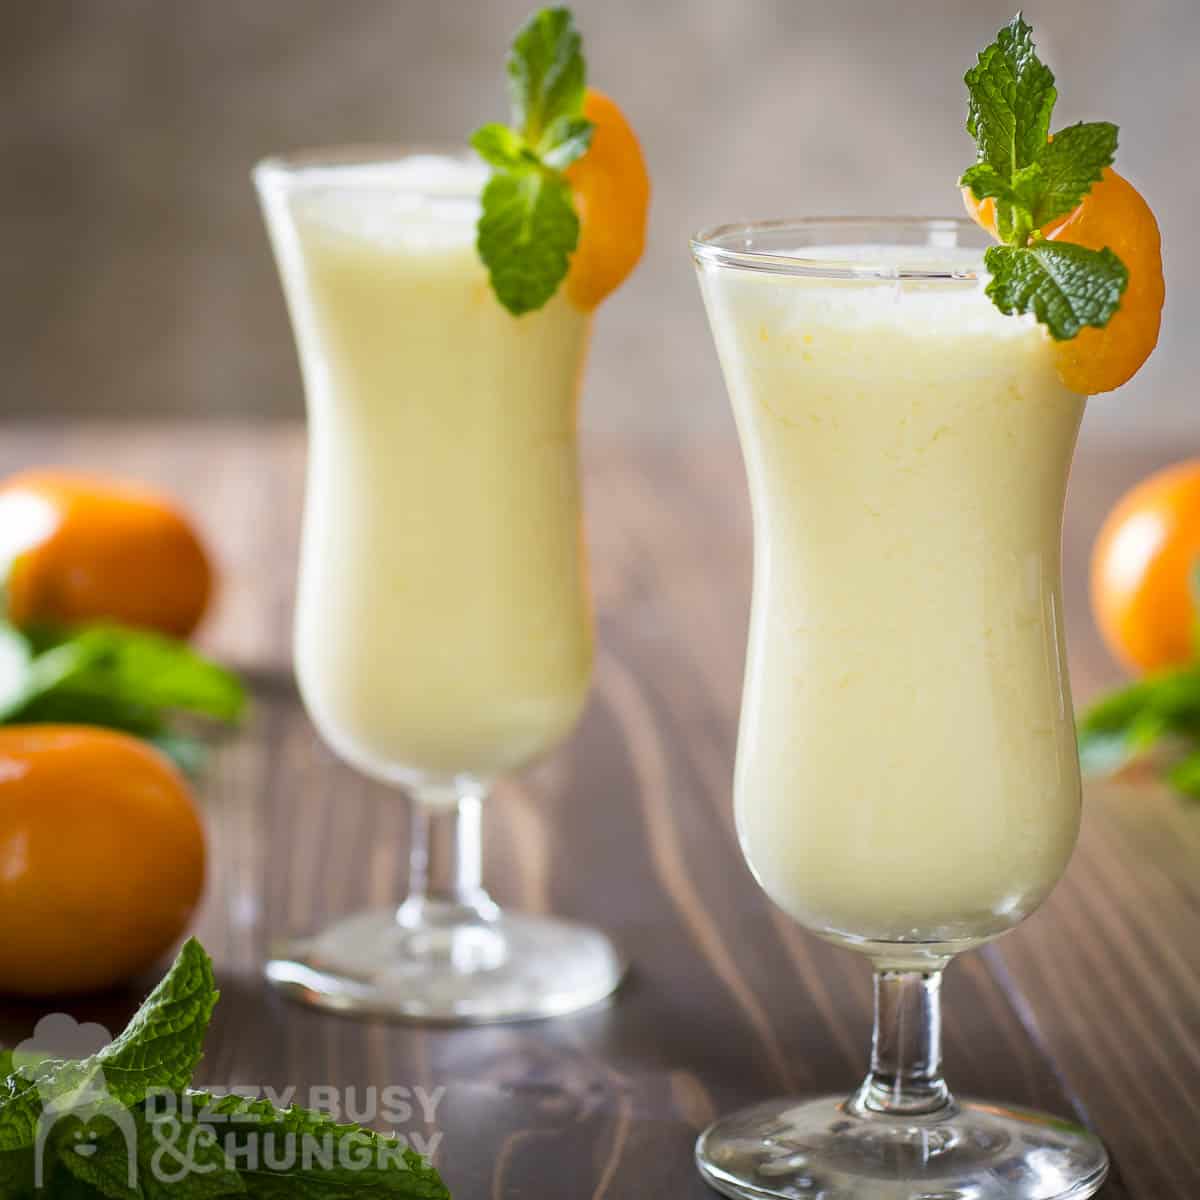 Side shot of two cocktail glasses with orange pineapple smoothie garnished with orange slices.